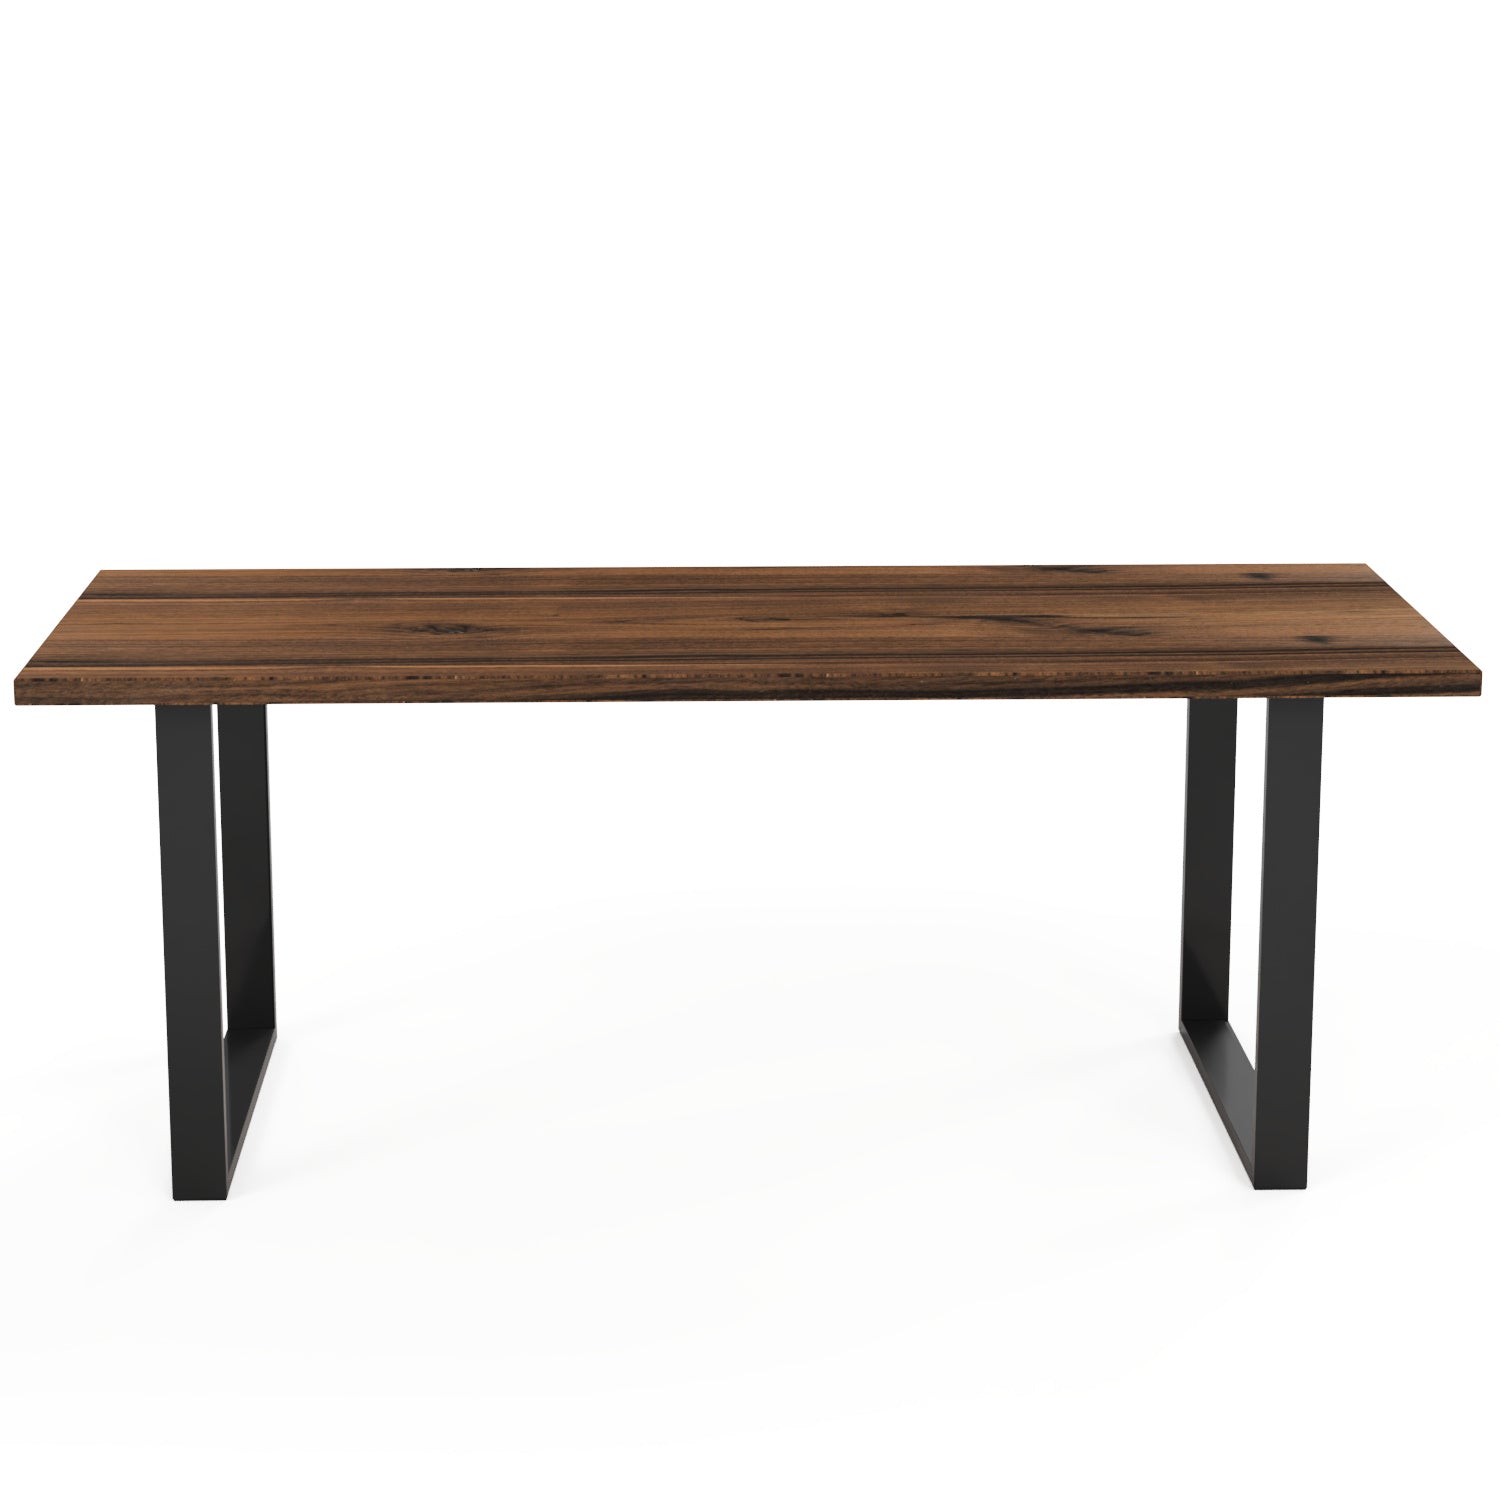 The Broadway Dining Table - FargoWoodworks